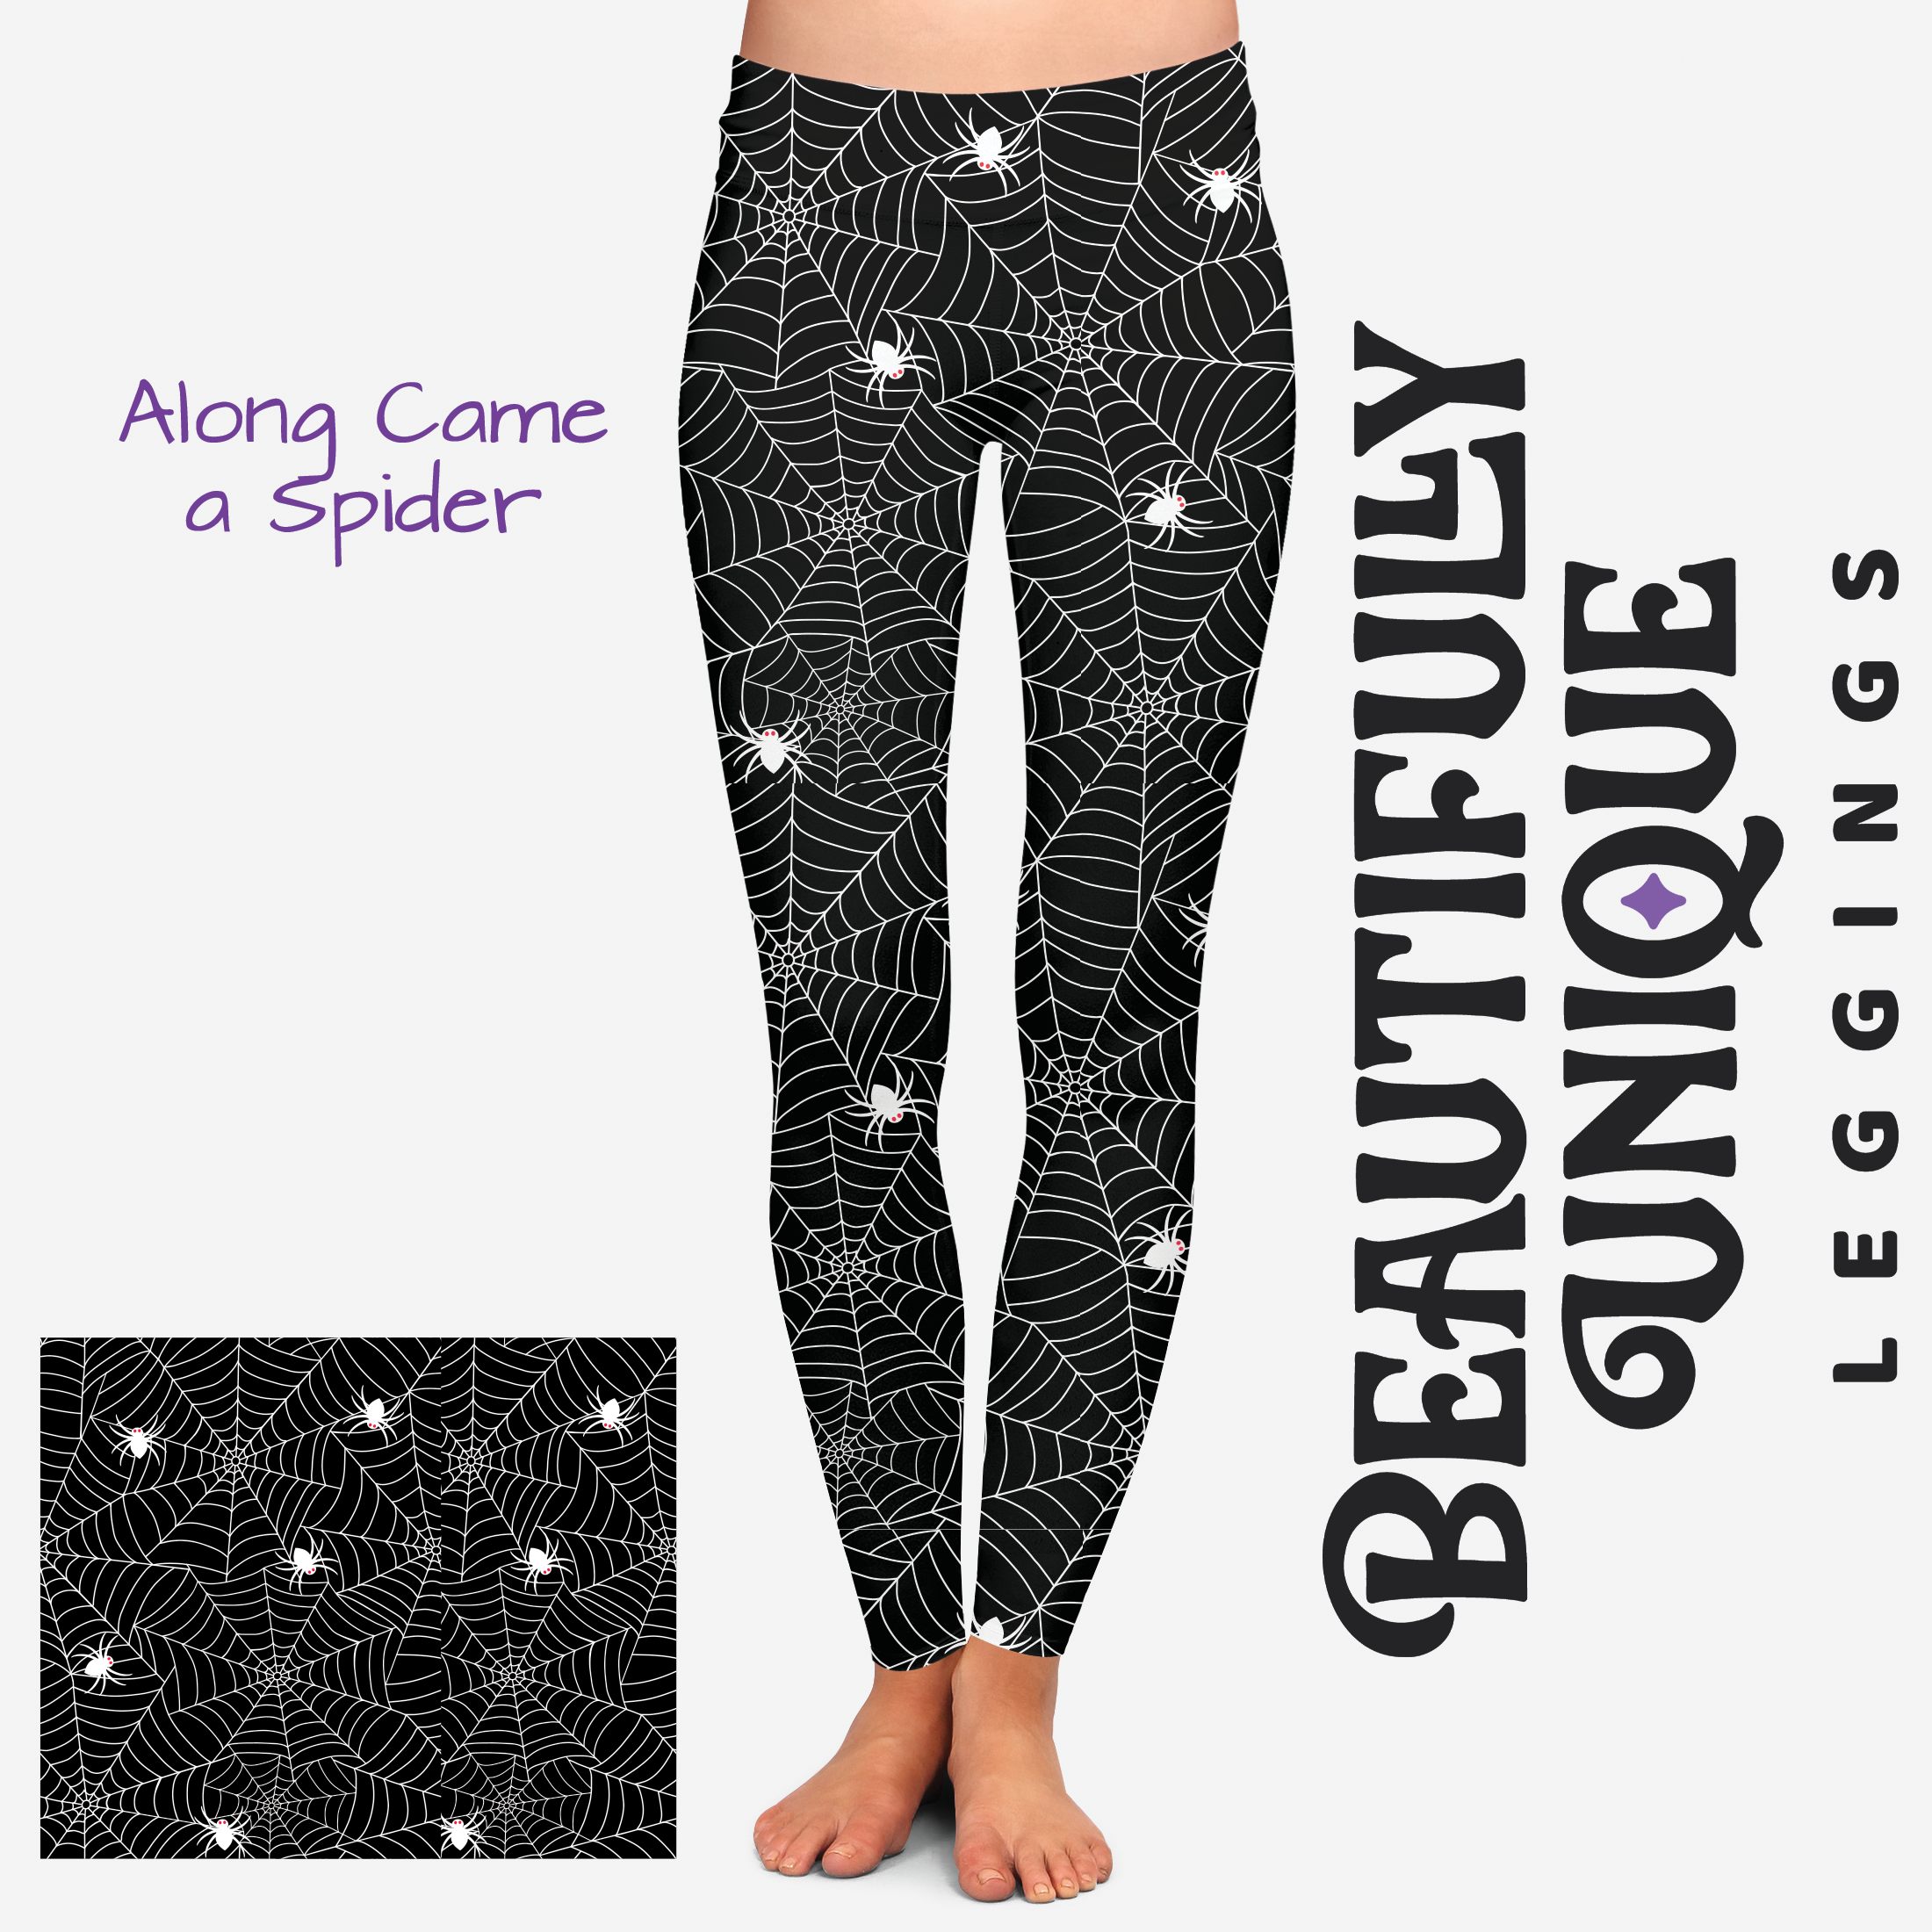 Along Came a Spider - High-quality Handcrafted Vibrant Leggings –  Beautifully Unique Leggings